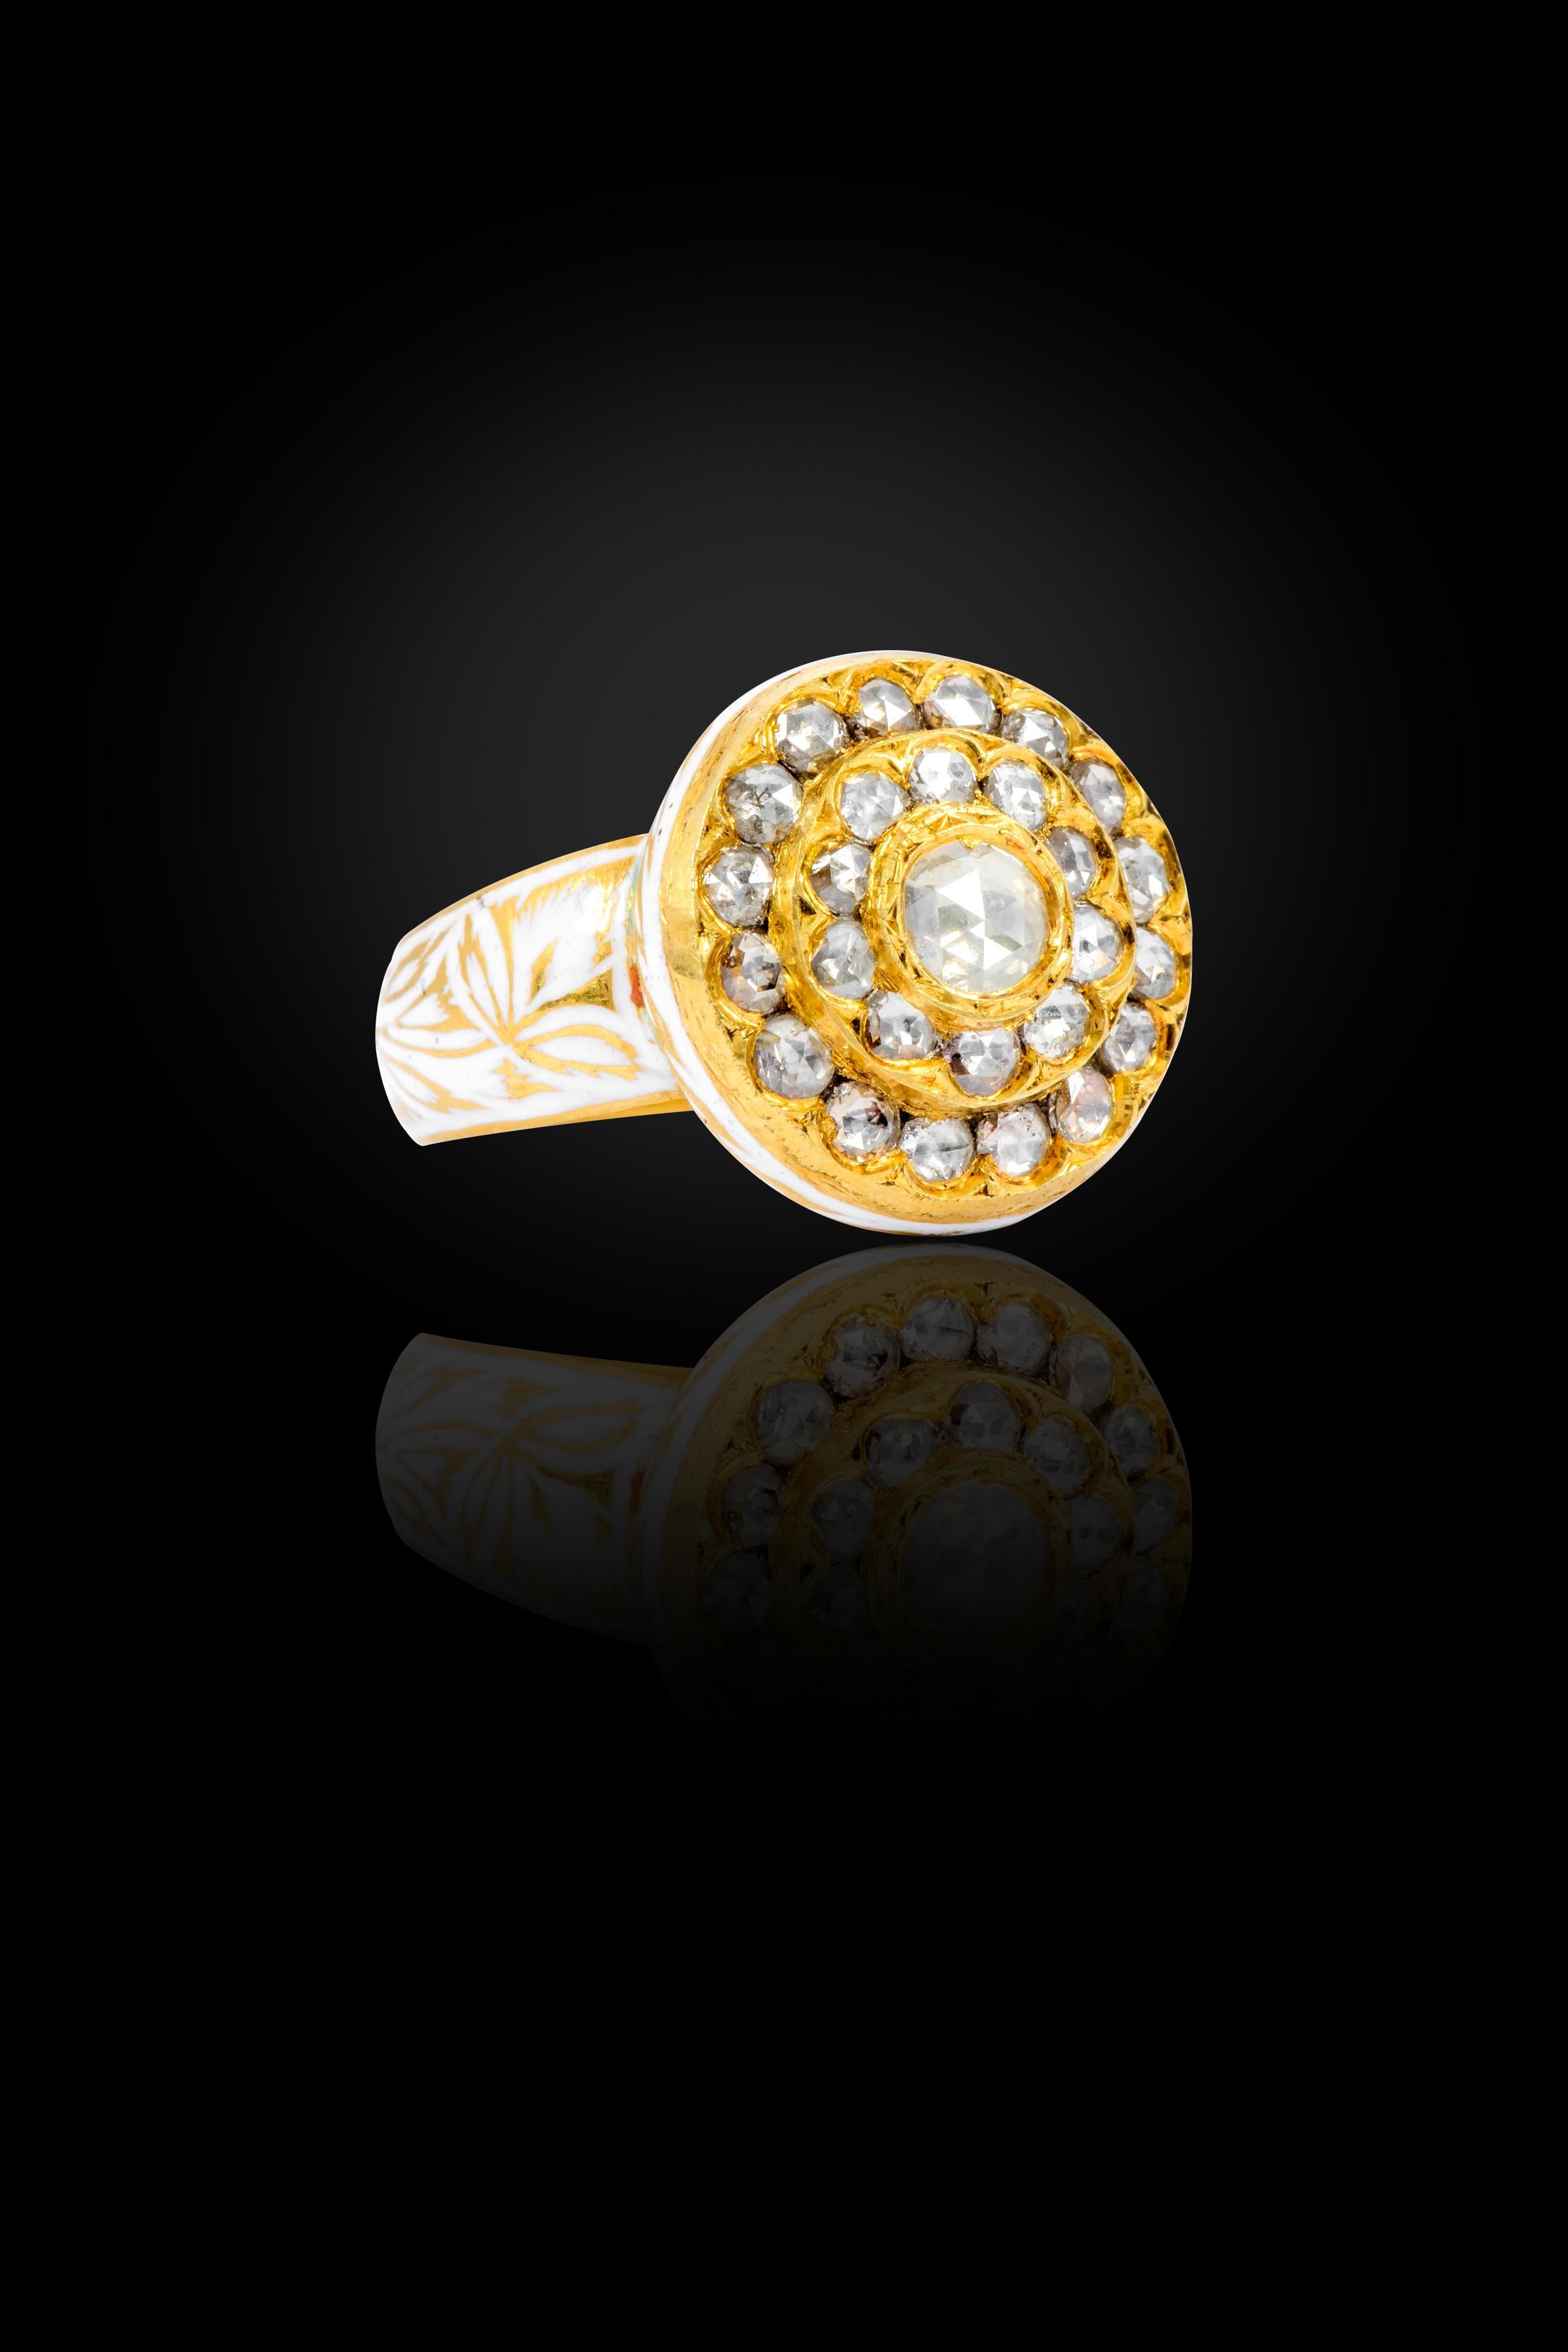 Women's 22 Karat Gold Rose-Cut Diamond Ring Handcrafted with White Enamel Work  For Sale